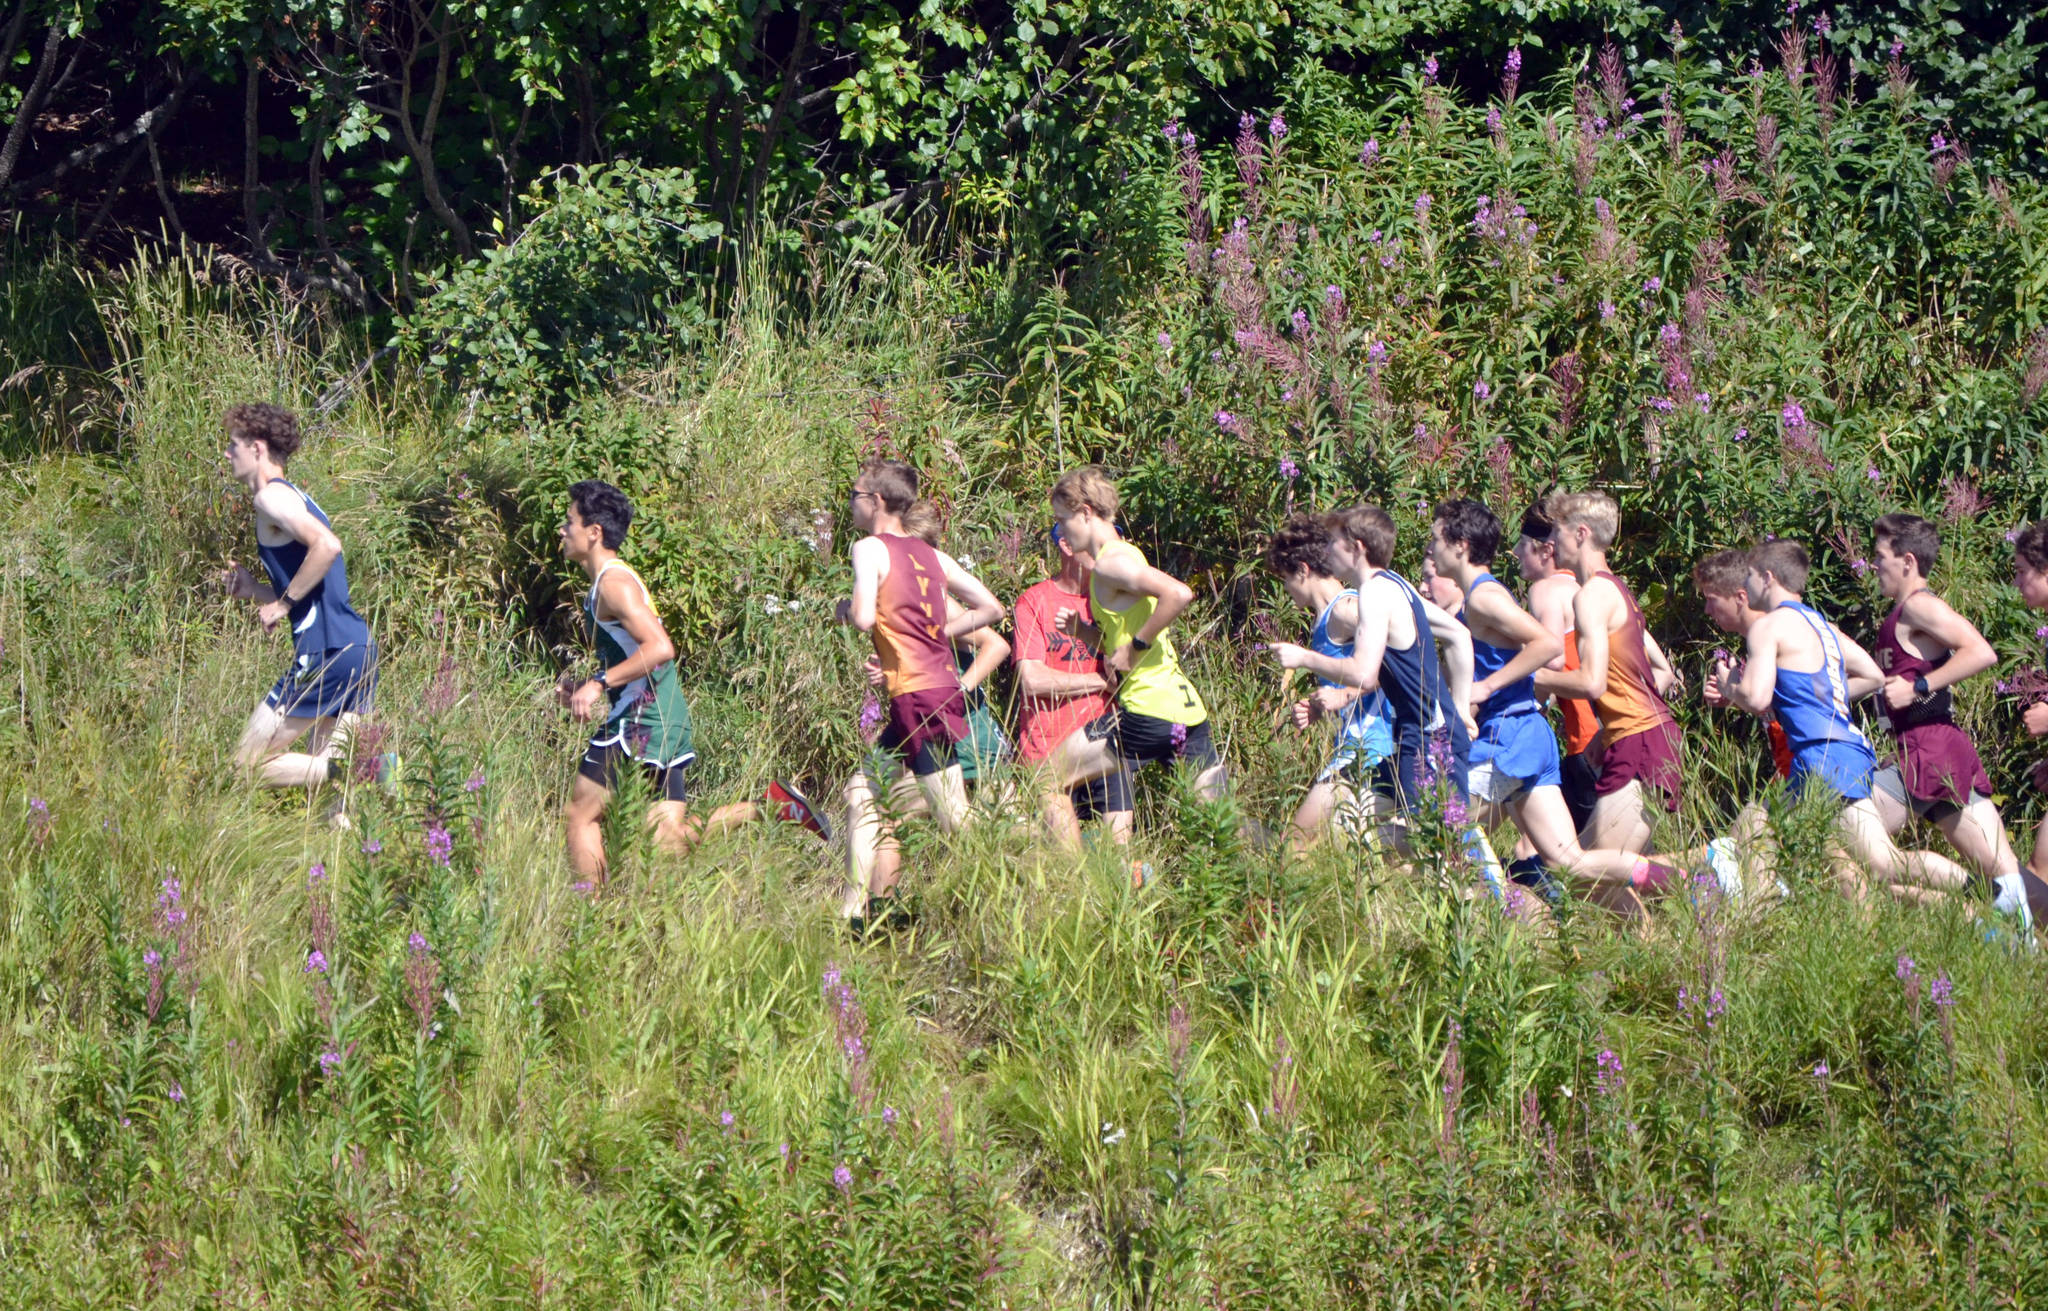 Homer’s Seamus McDonough leads a pack early in the boys varsity race at the Ted McKenney XC Invitational on Saturday, Aug. 21, 2021, at Tsalteshi Trails just outside of Soldotna, Alaska. McDonough finished ninth in the race. (Photo by Jeff Helminiak/Peninsula Clarion)